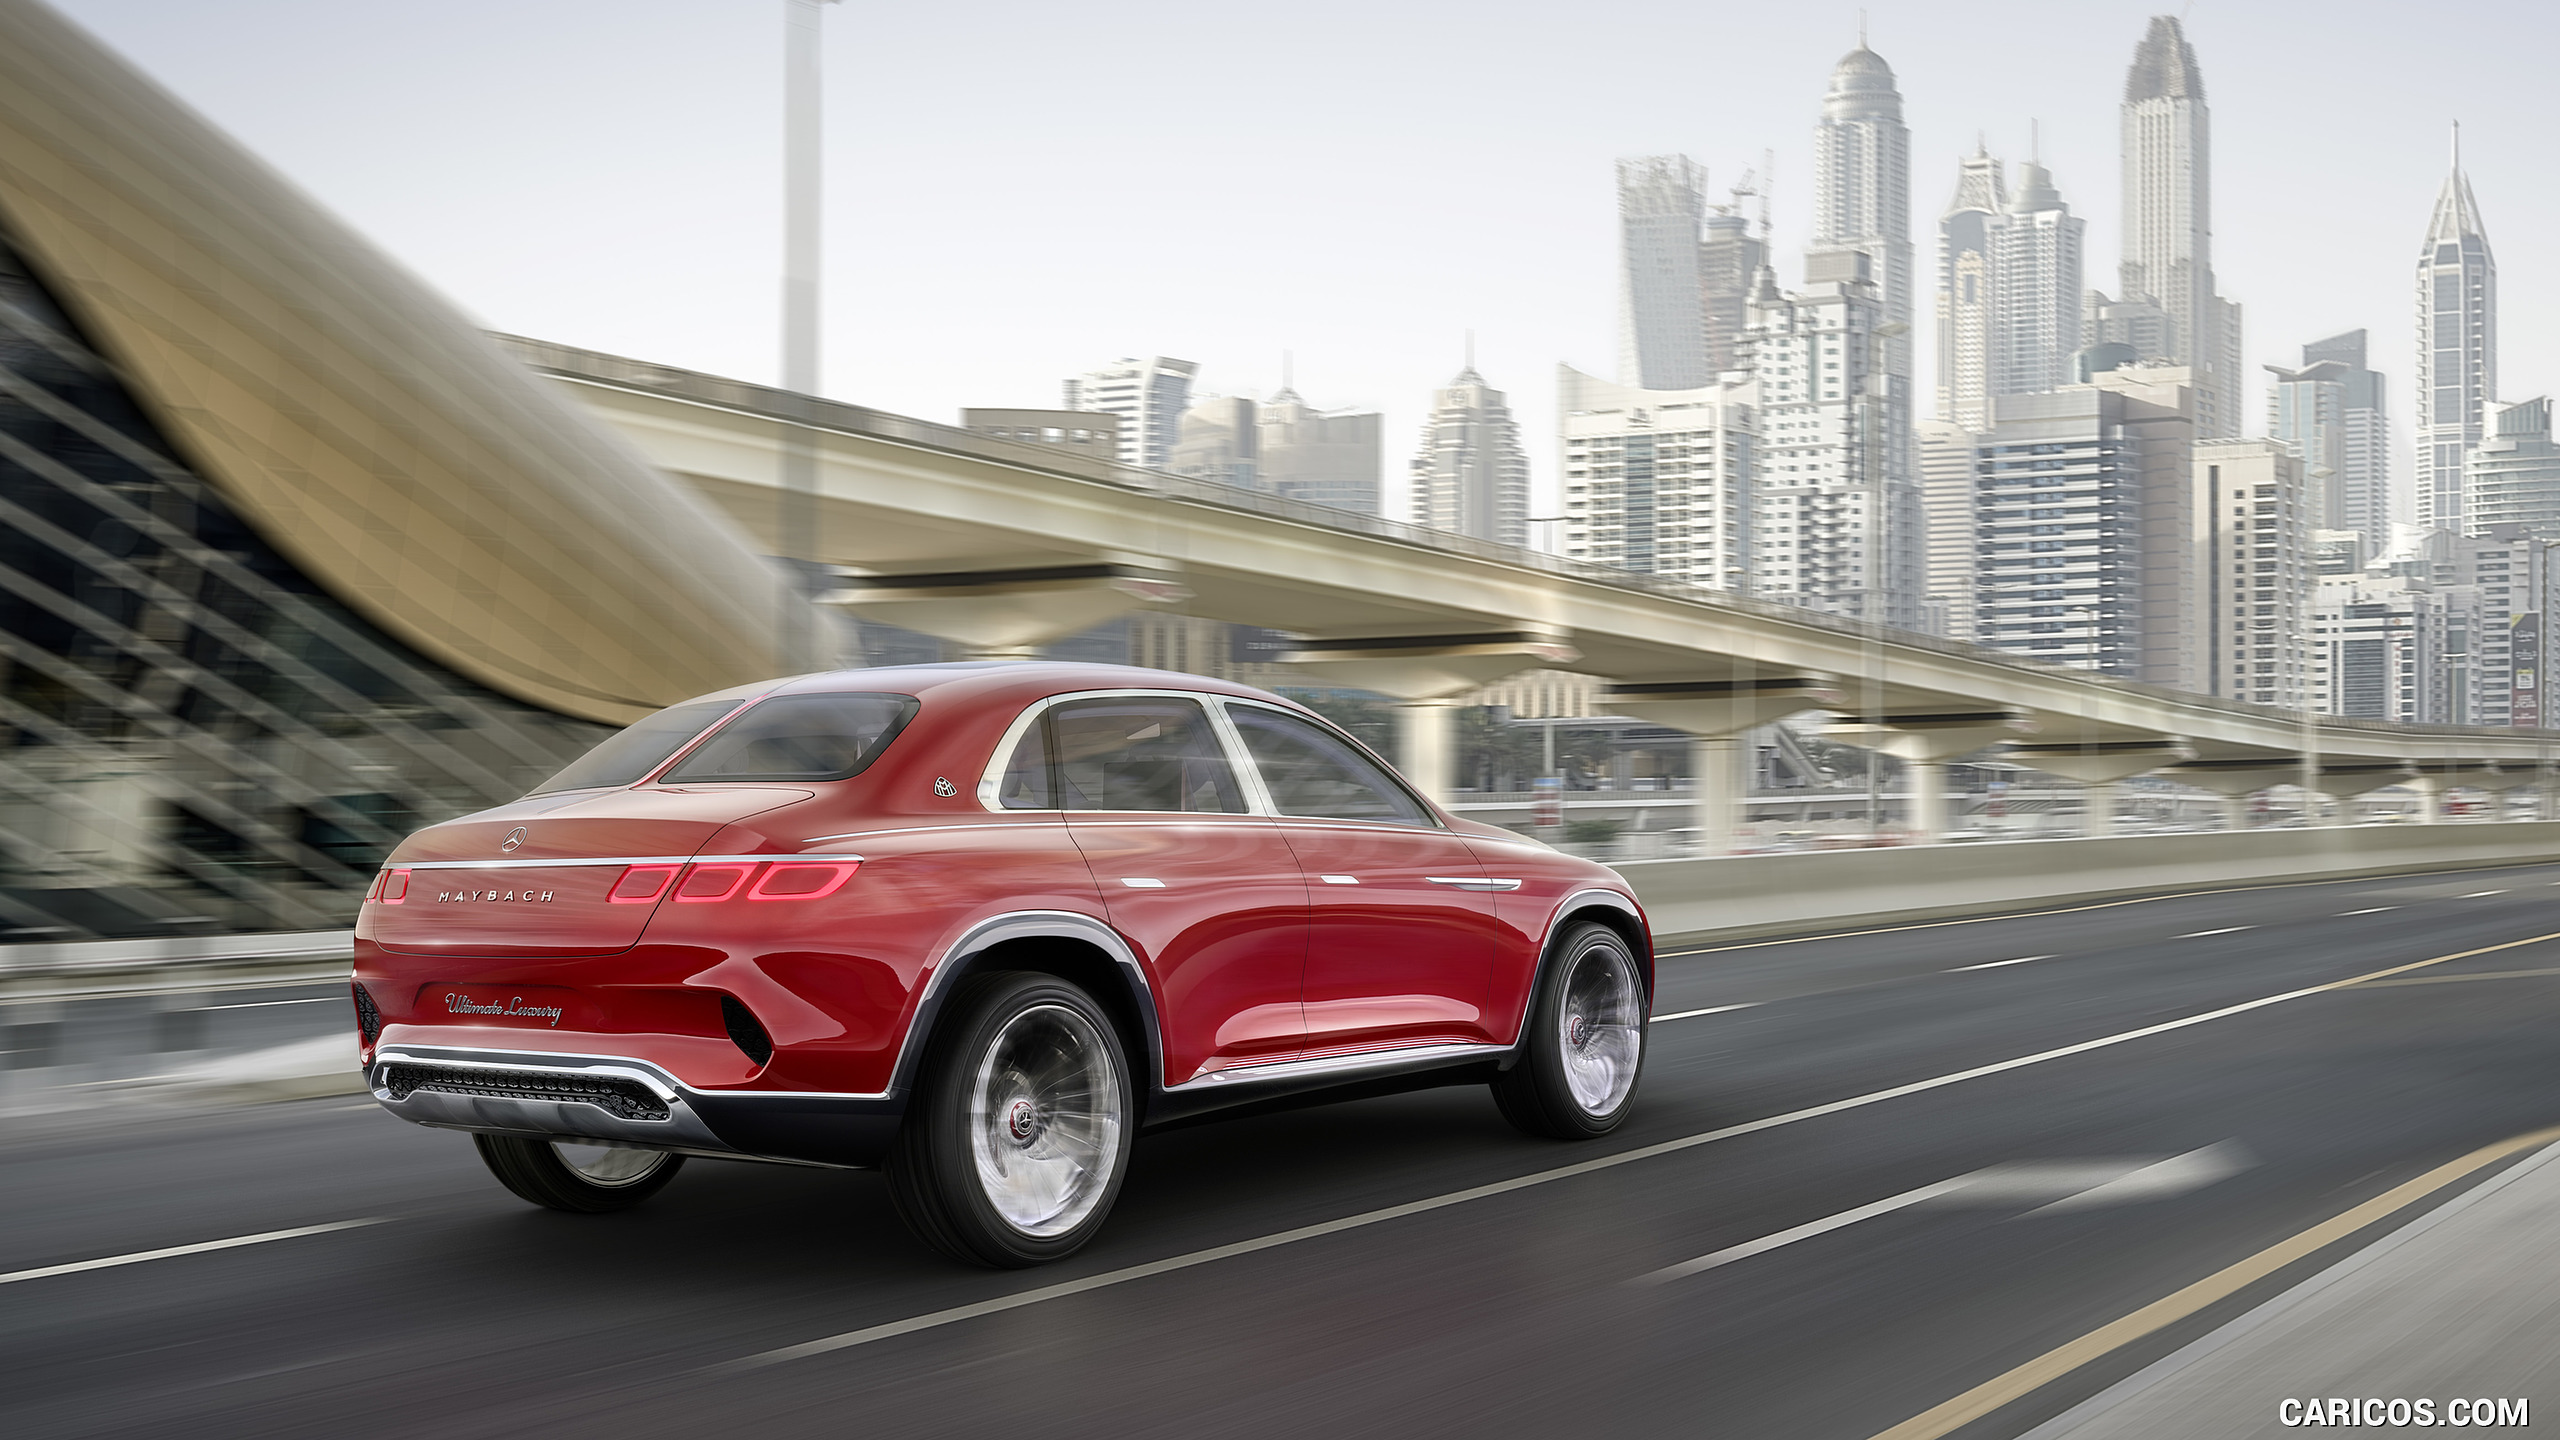 2018 Mercedes-Maybach Vision Ultimate Luxury SUV Concept - Rear Three-Quarter, #3 of 41